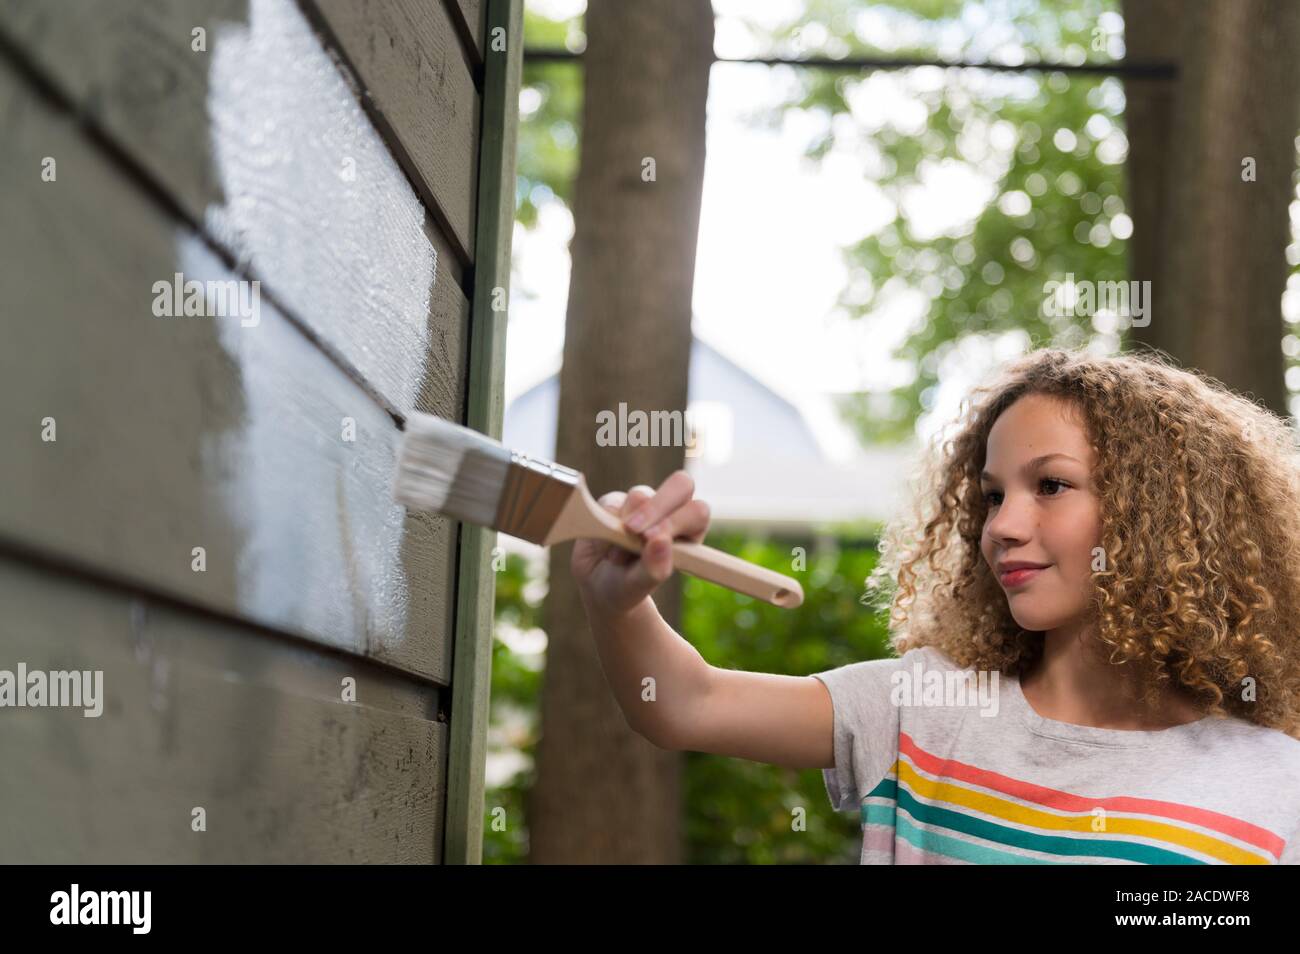 Girl painting house Stock Photo